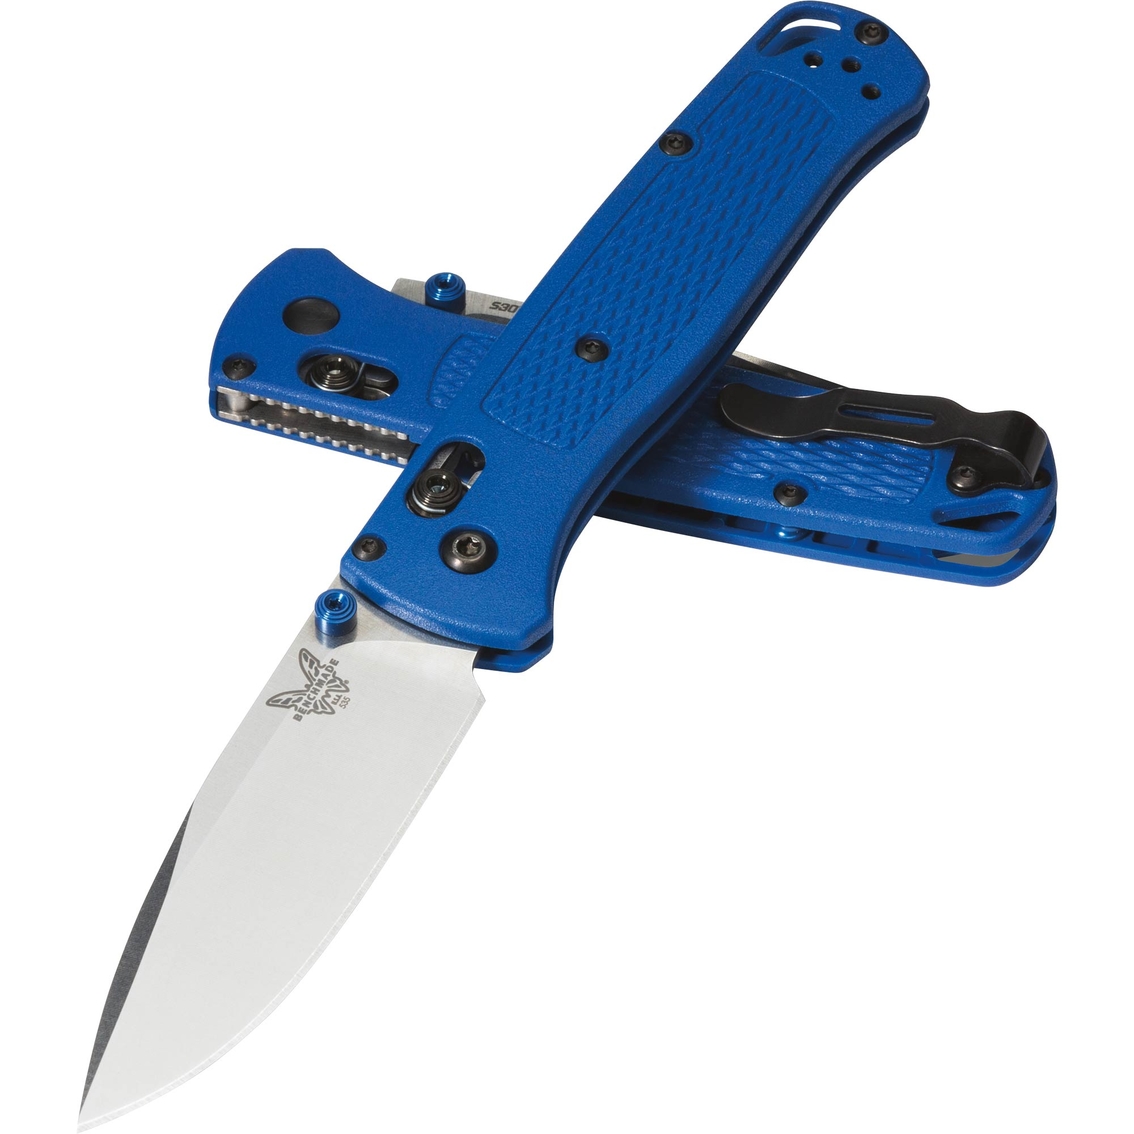 Benchmade 535 Bugout Knife - Image 2 of 2